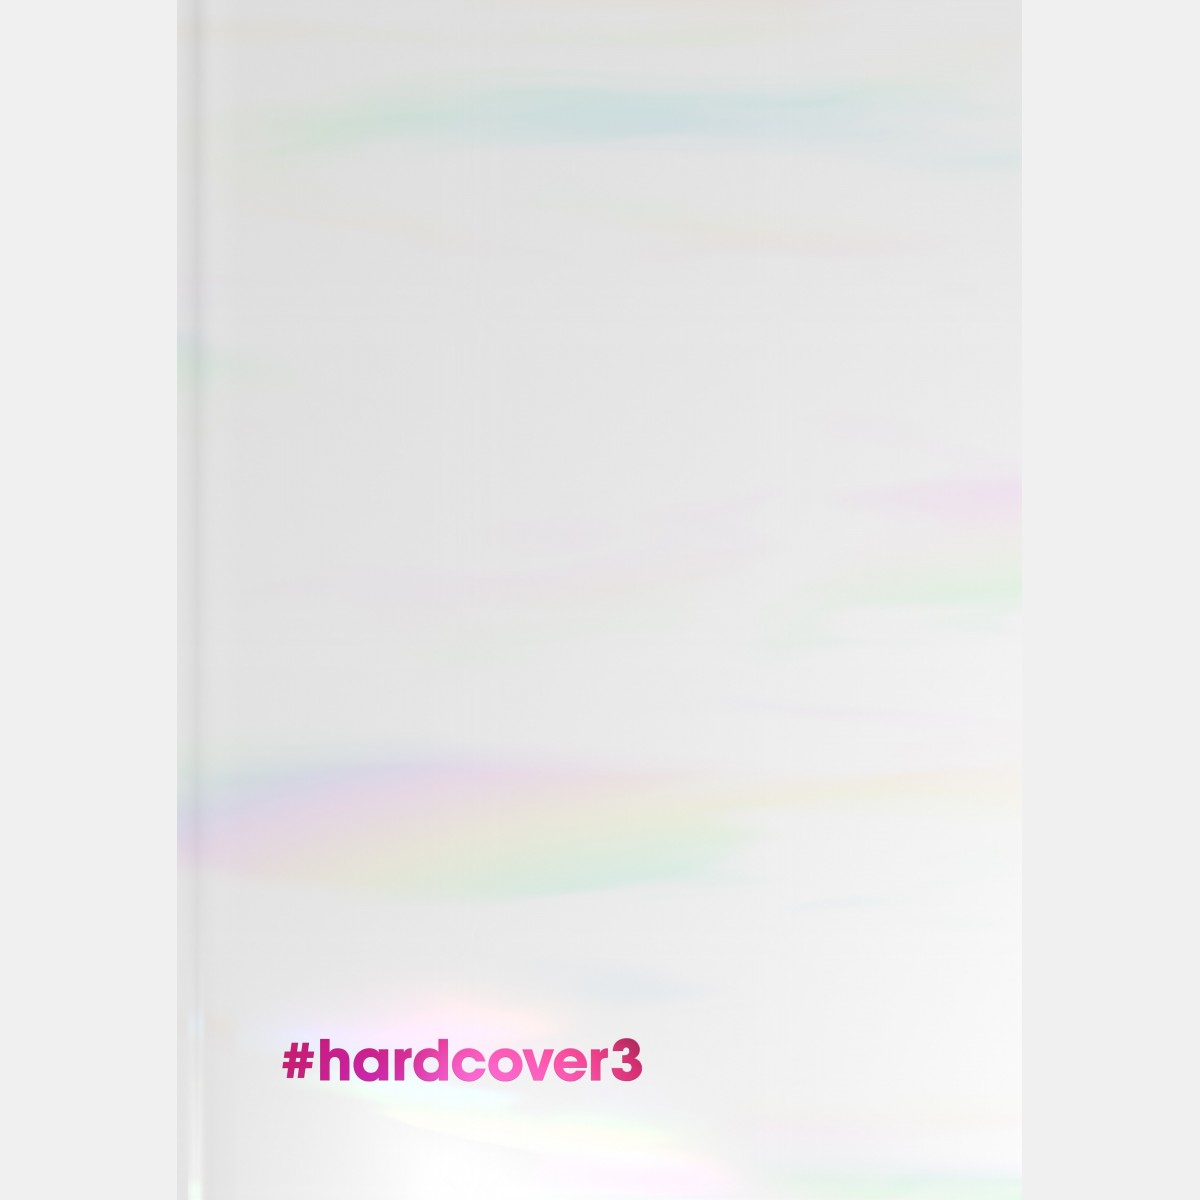 Hardcover 2 - Collective